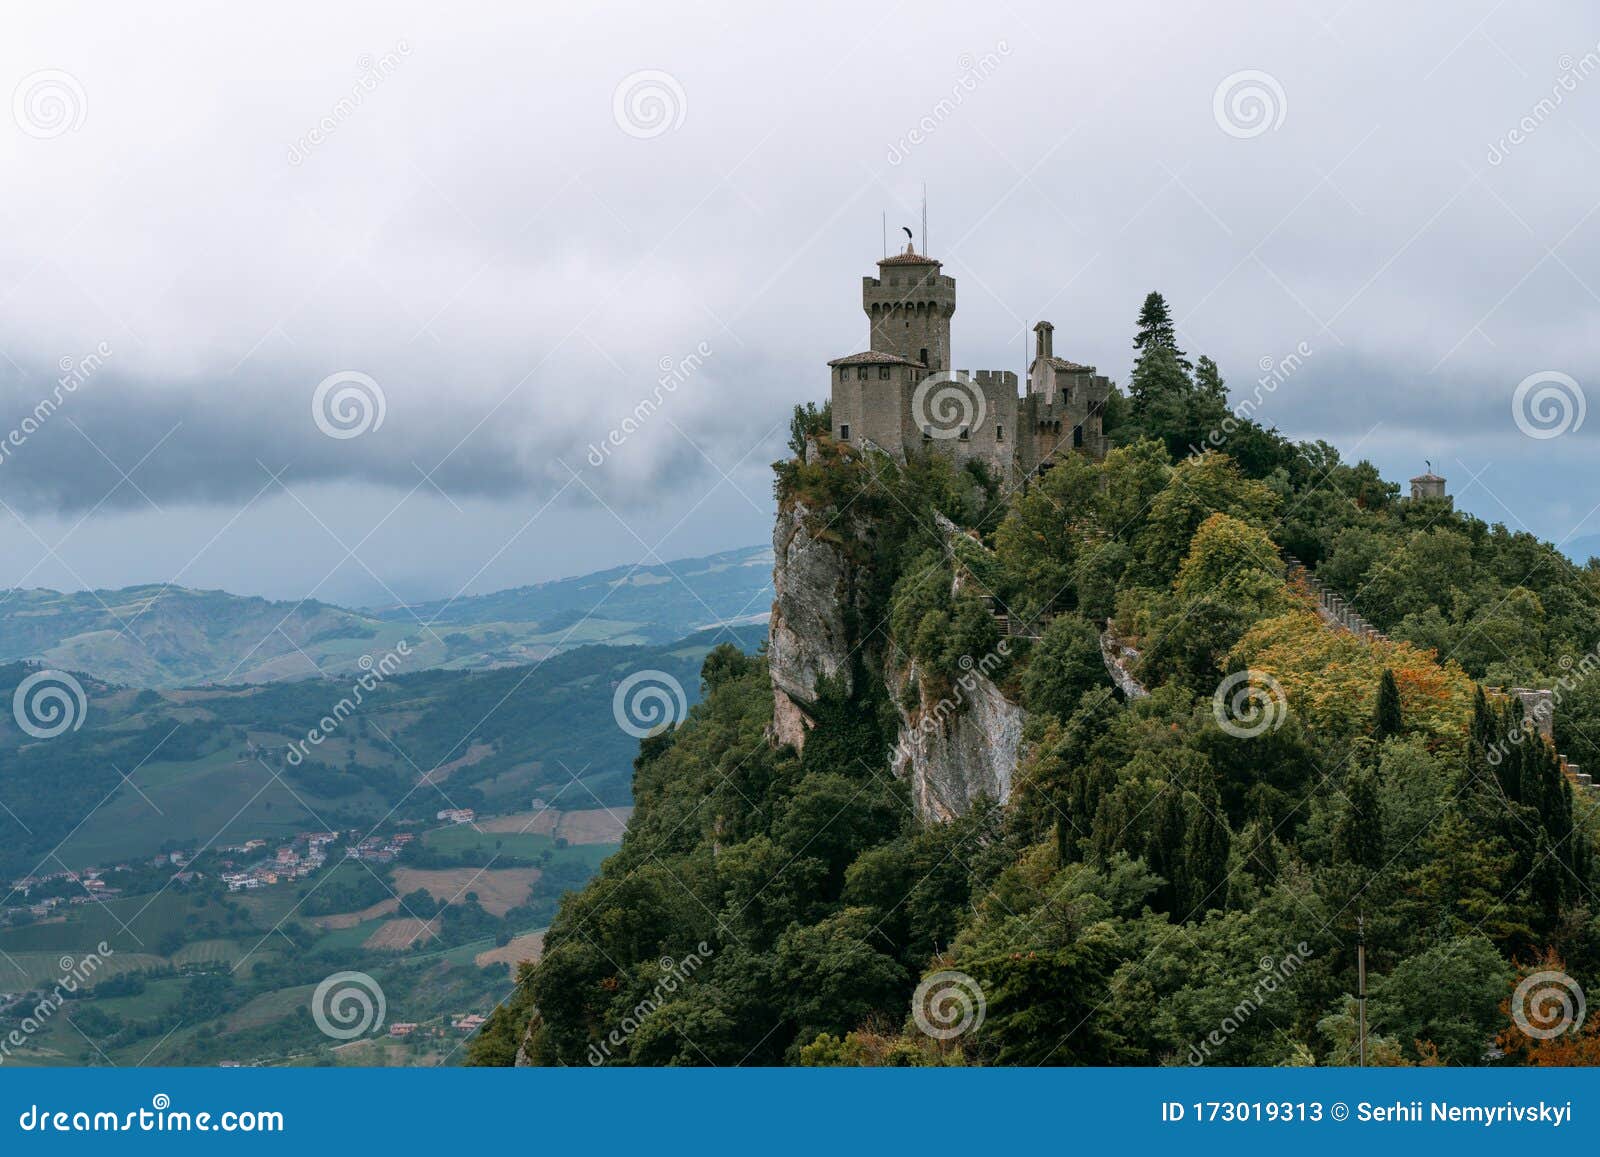 view from the top of the mountain to the medieval fortification. dramatic mystical weather with fog. castle in san marino seconda